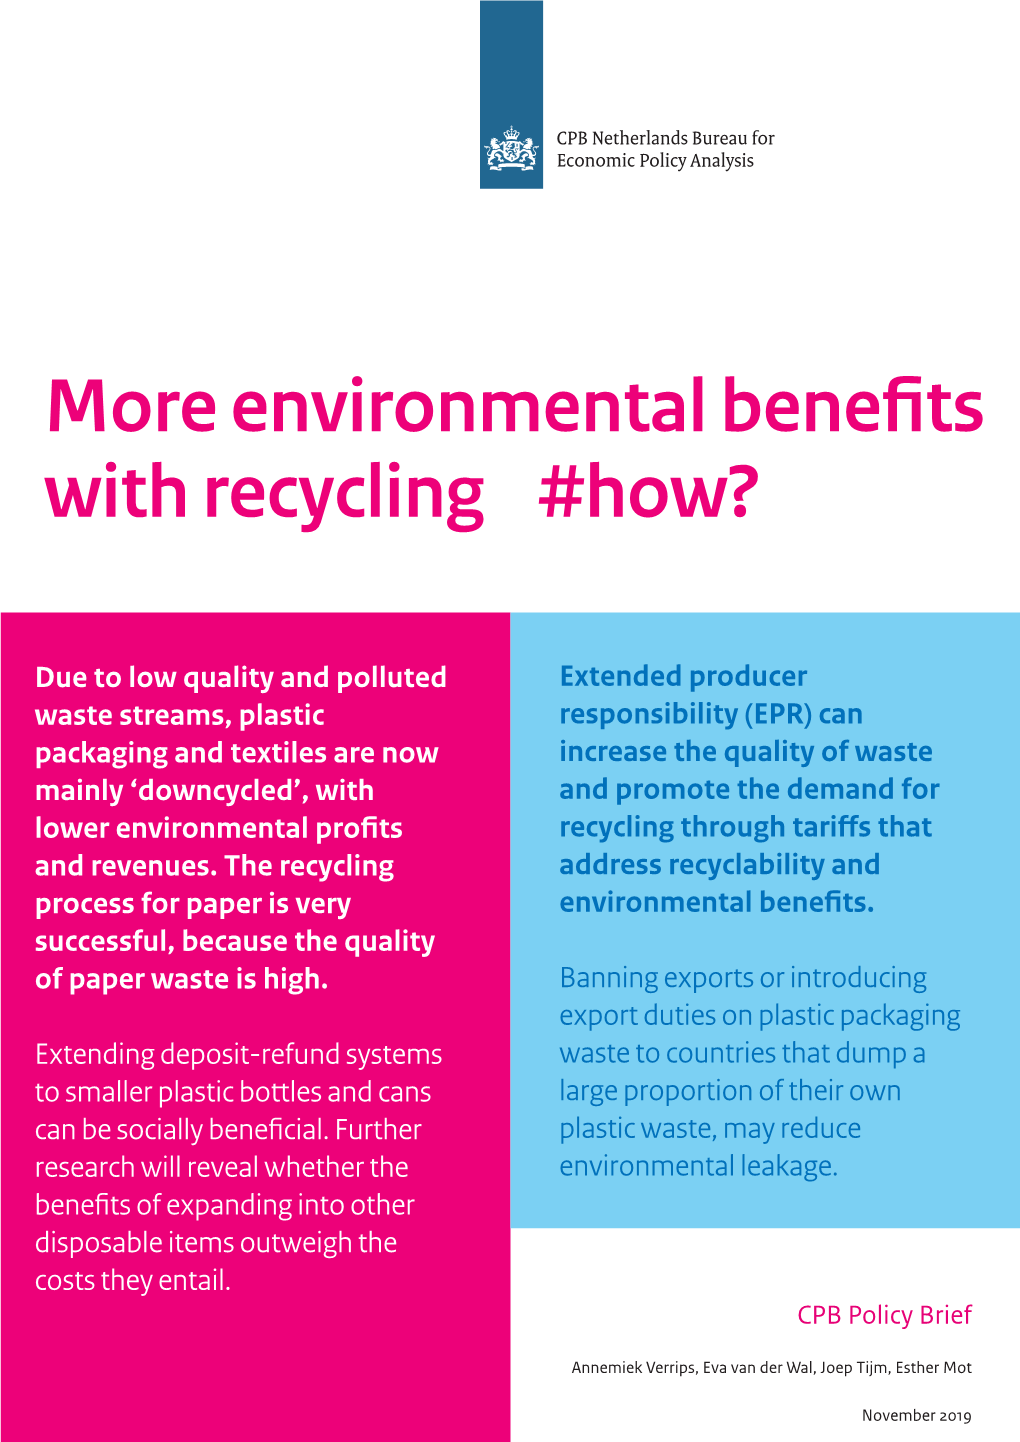 More Environmental Benefits with Recycling #How?